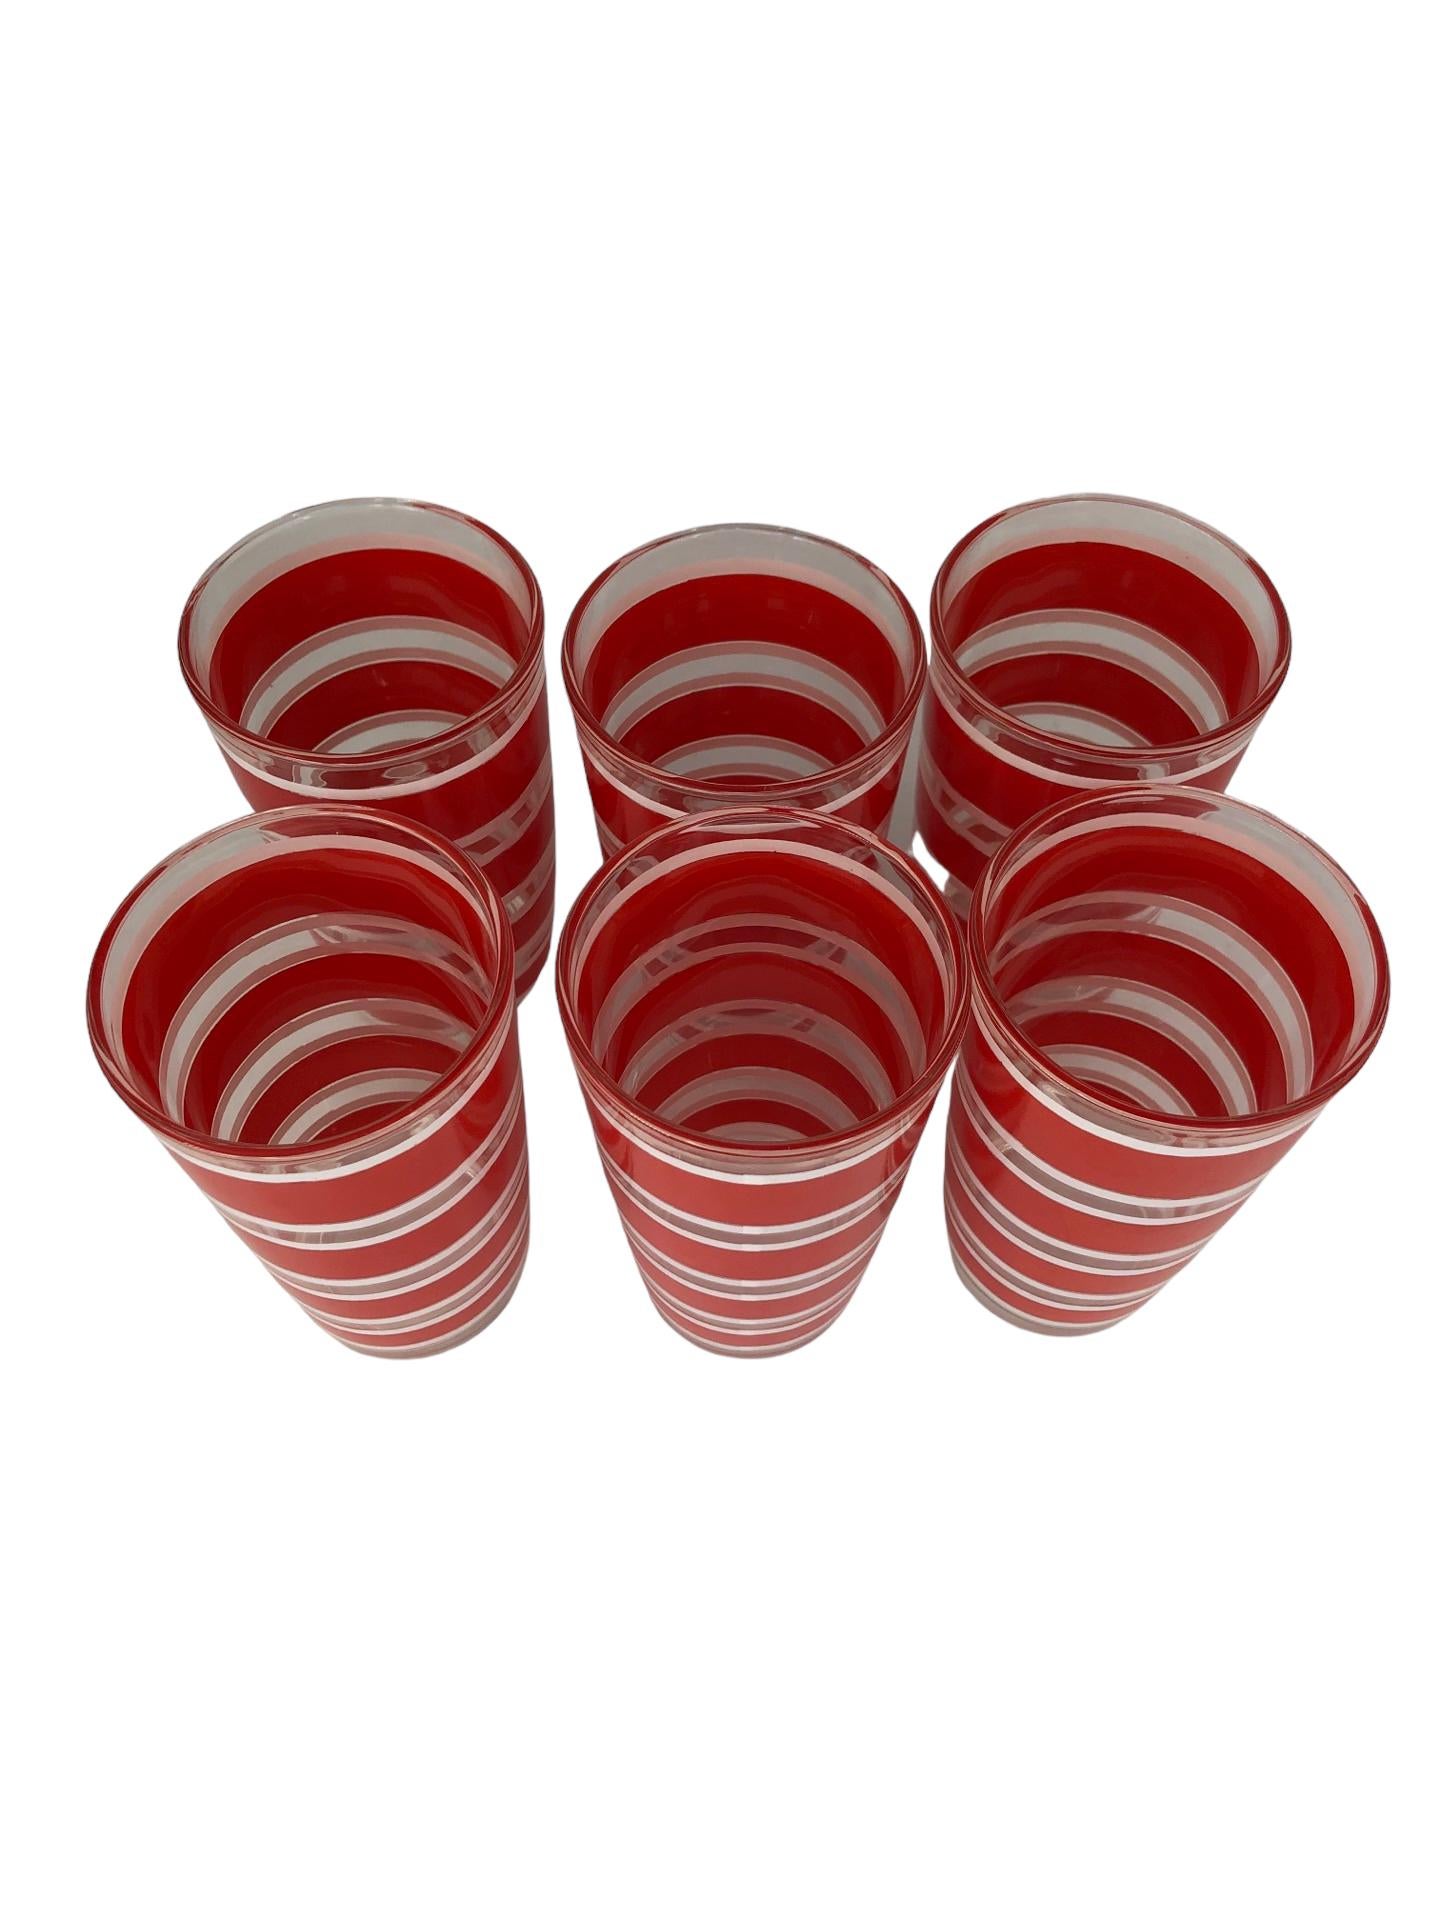 Late 20th Century Set of Vintage Hazel-Atlas Red and White Banded High Ball Glasses in Metal Caddy For Sale